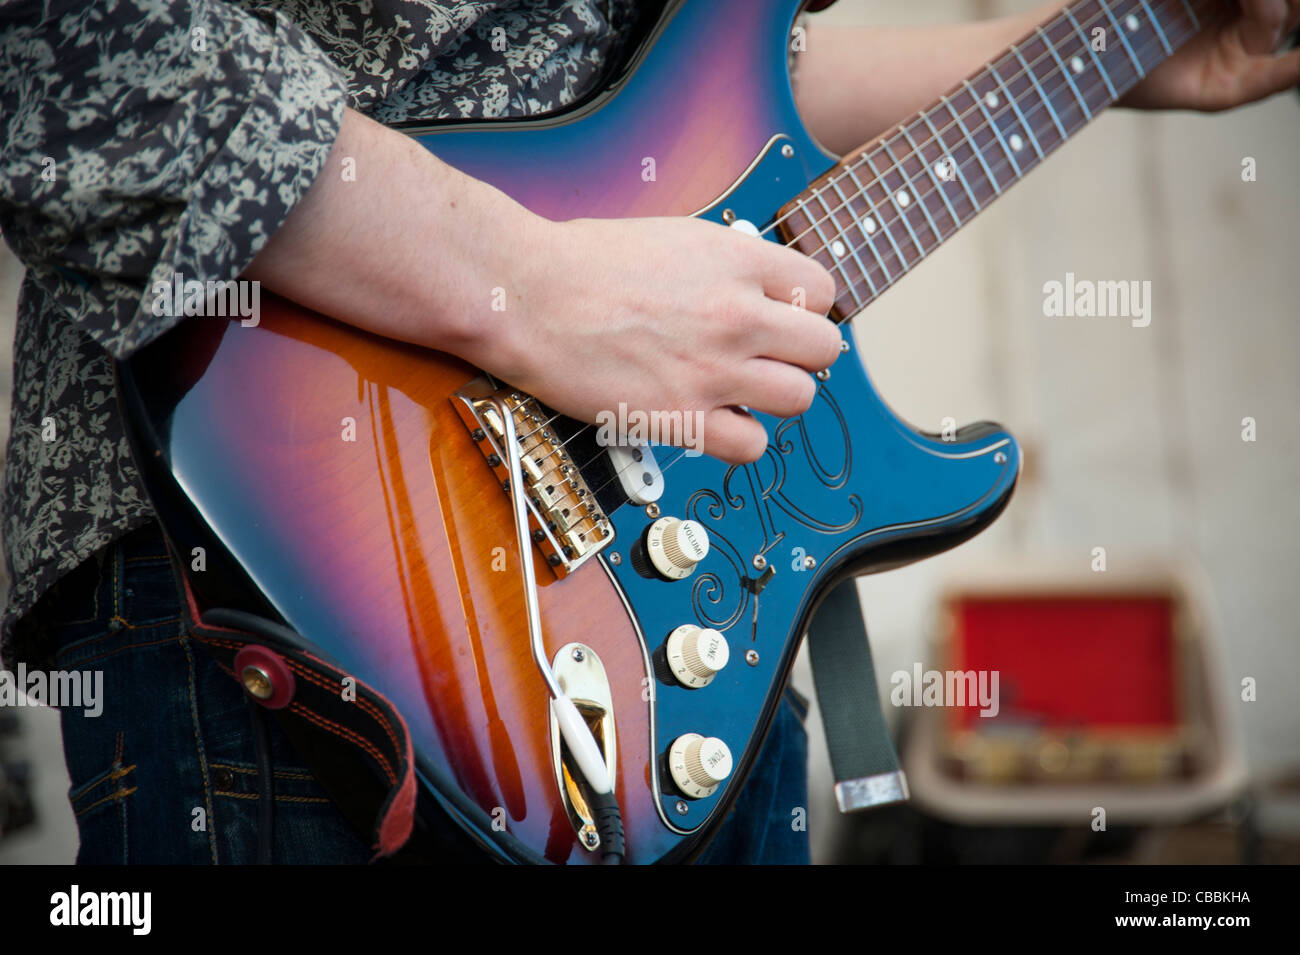 Man playing Fender Stratocaster SRV guitar, close in showing hands and  guitar body Stock Photo - Alamy